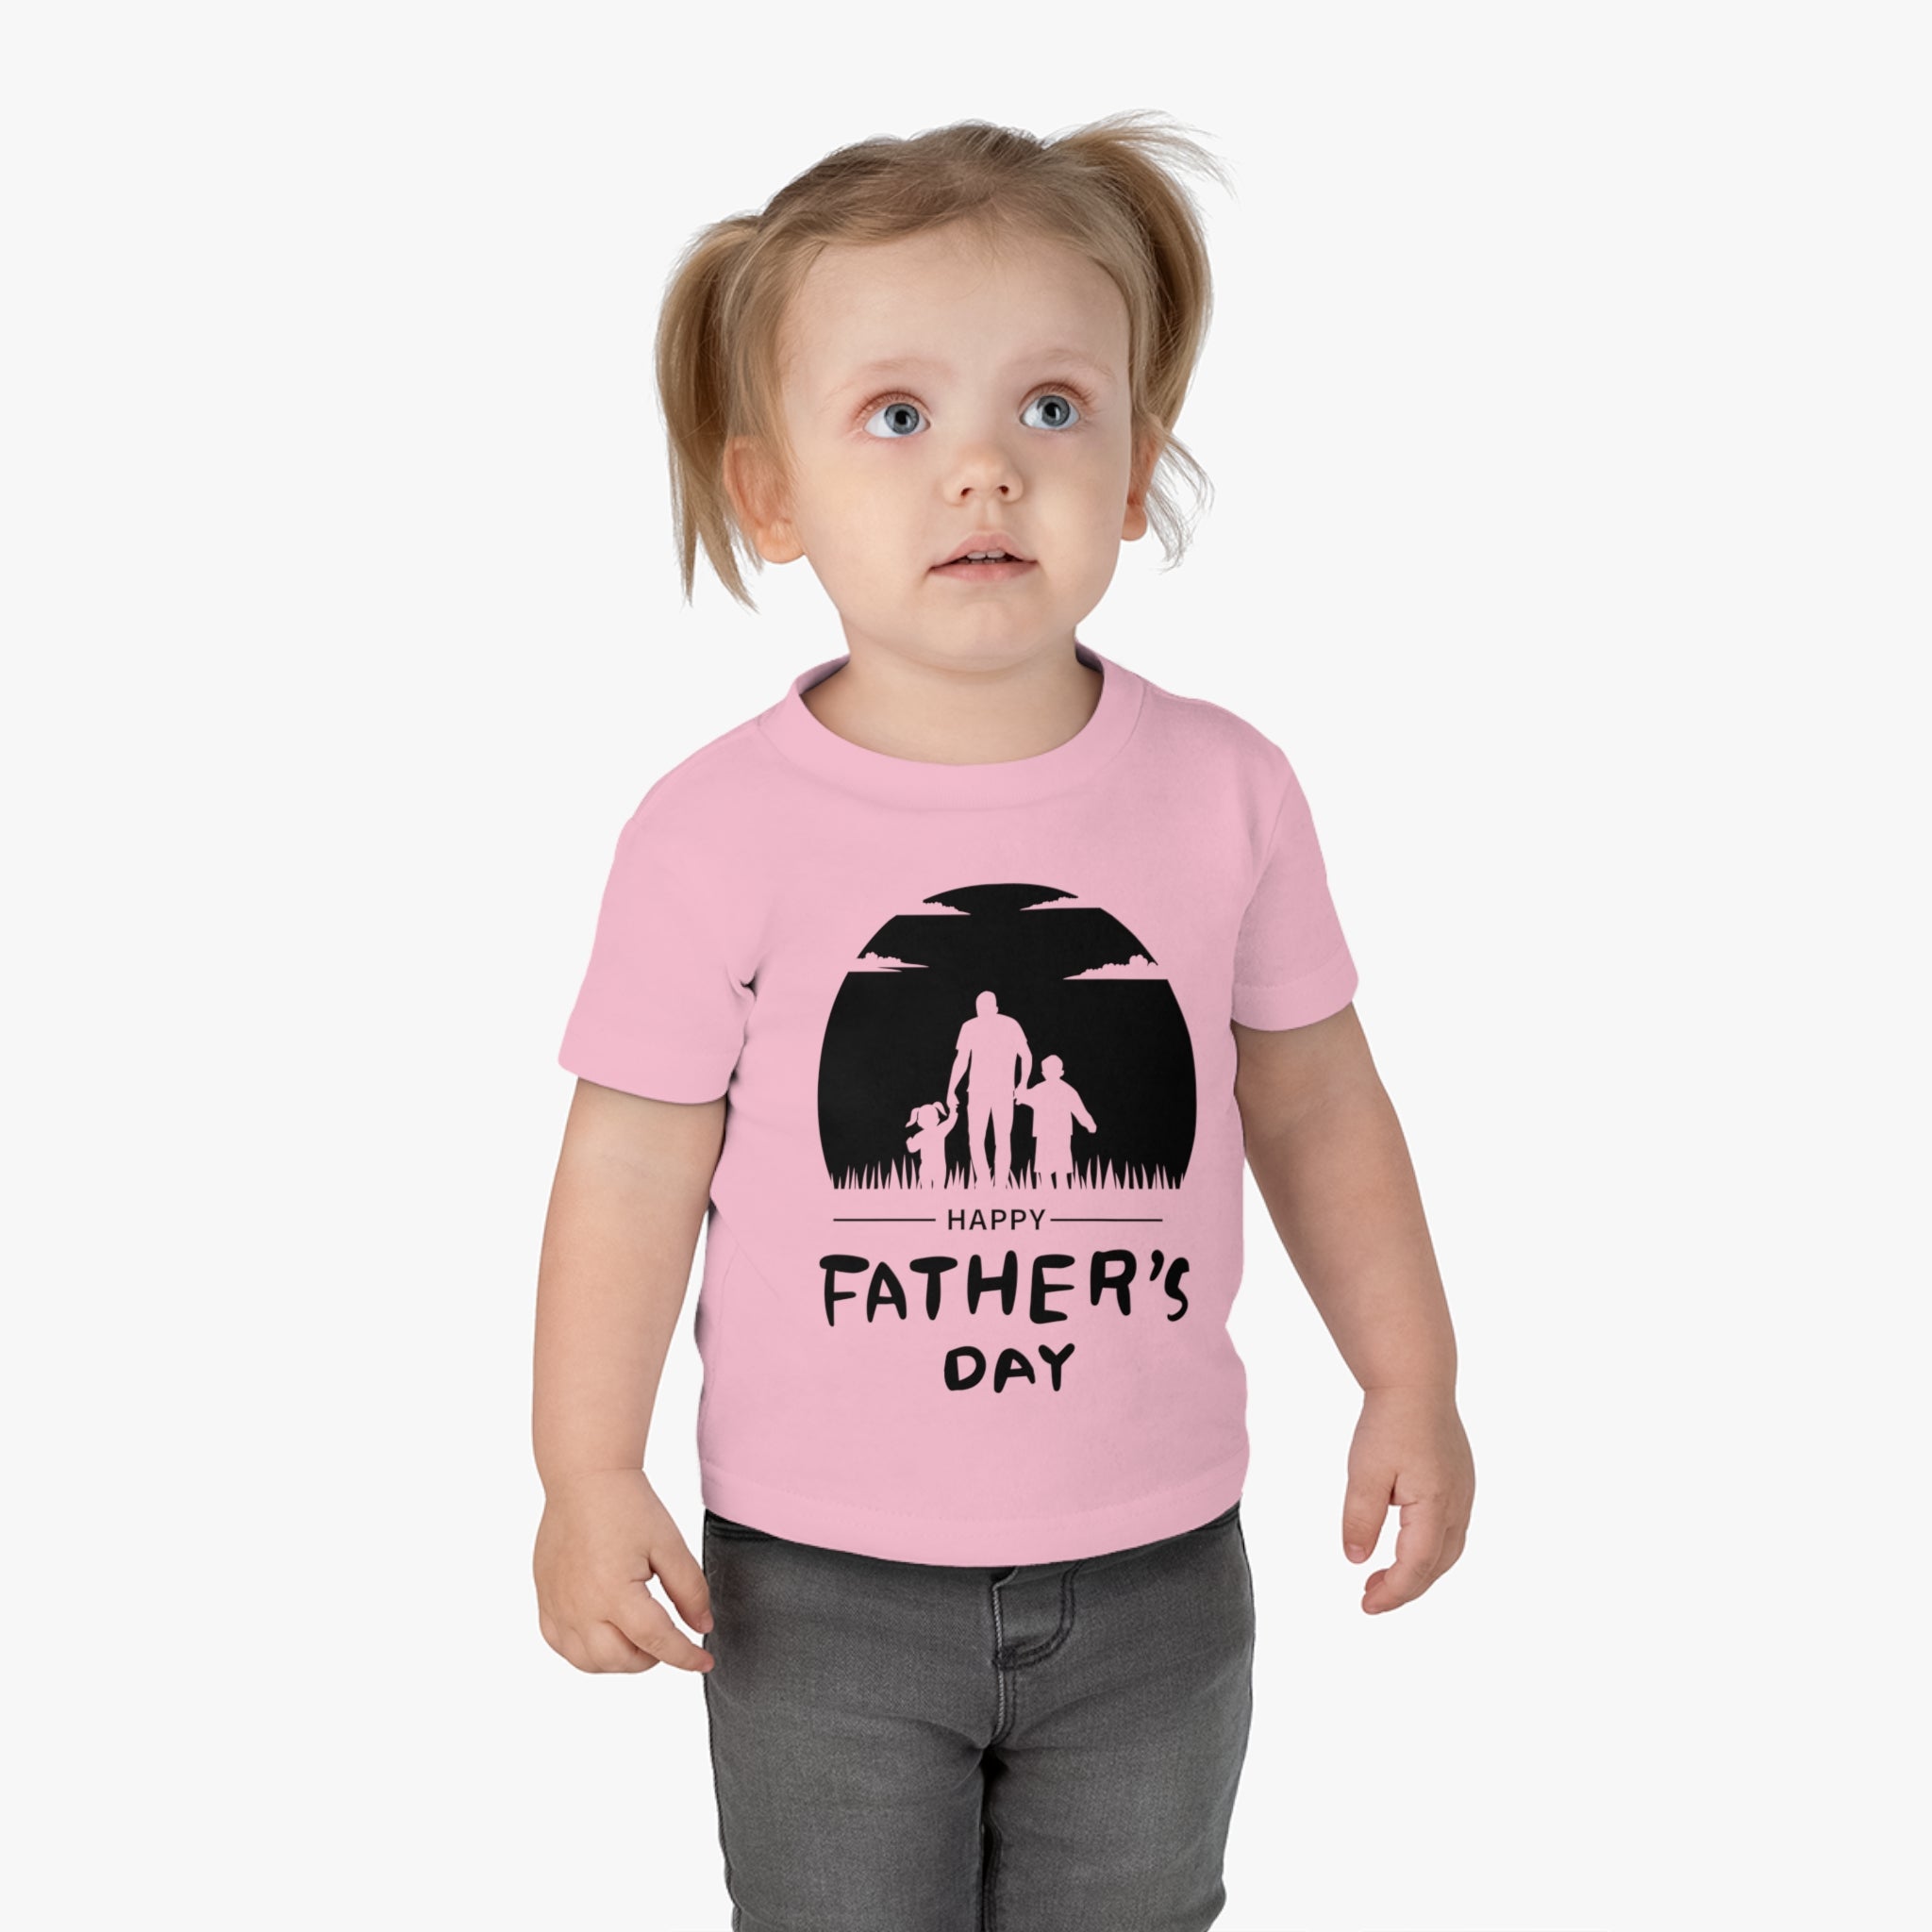 Happy Father's Day Infant Shirt, Baby Tee, Infant Tee